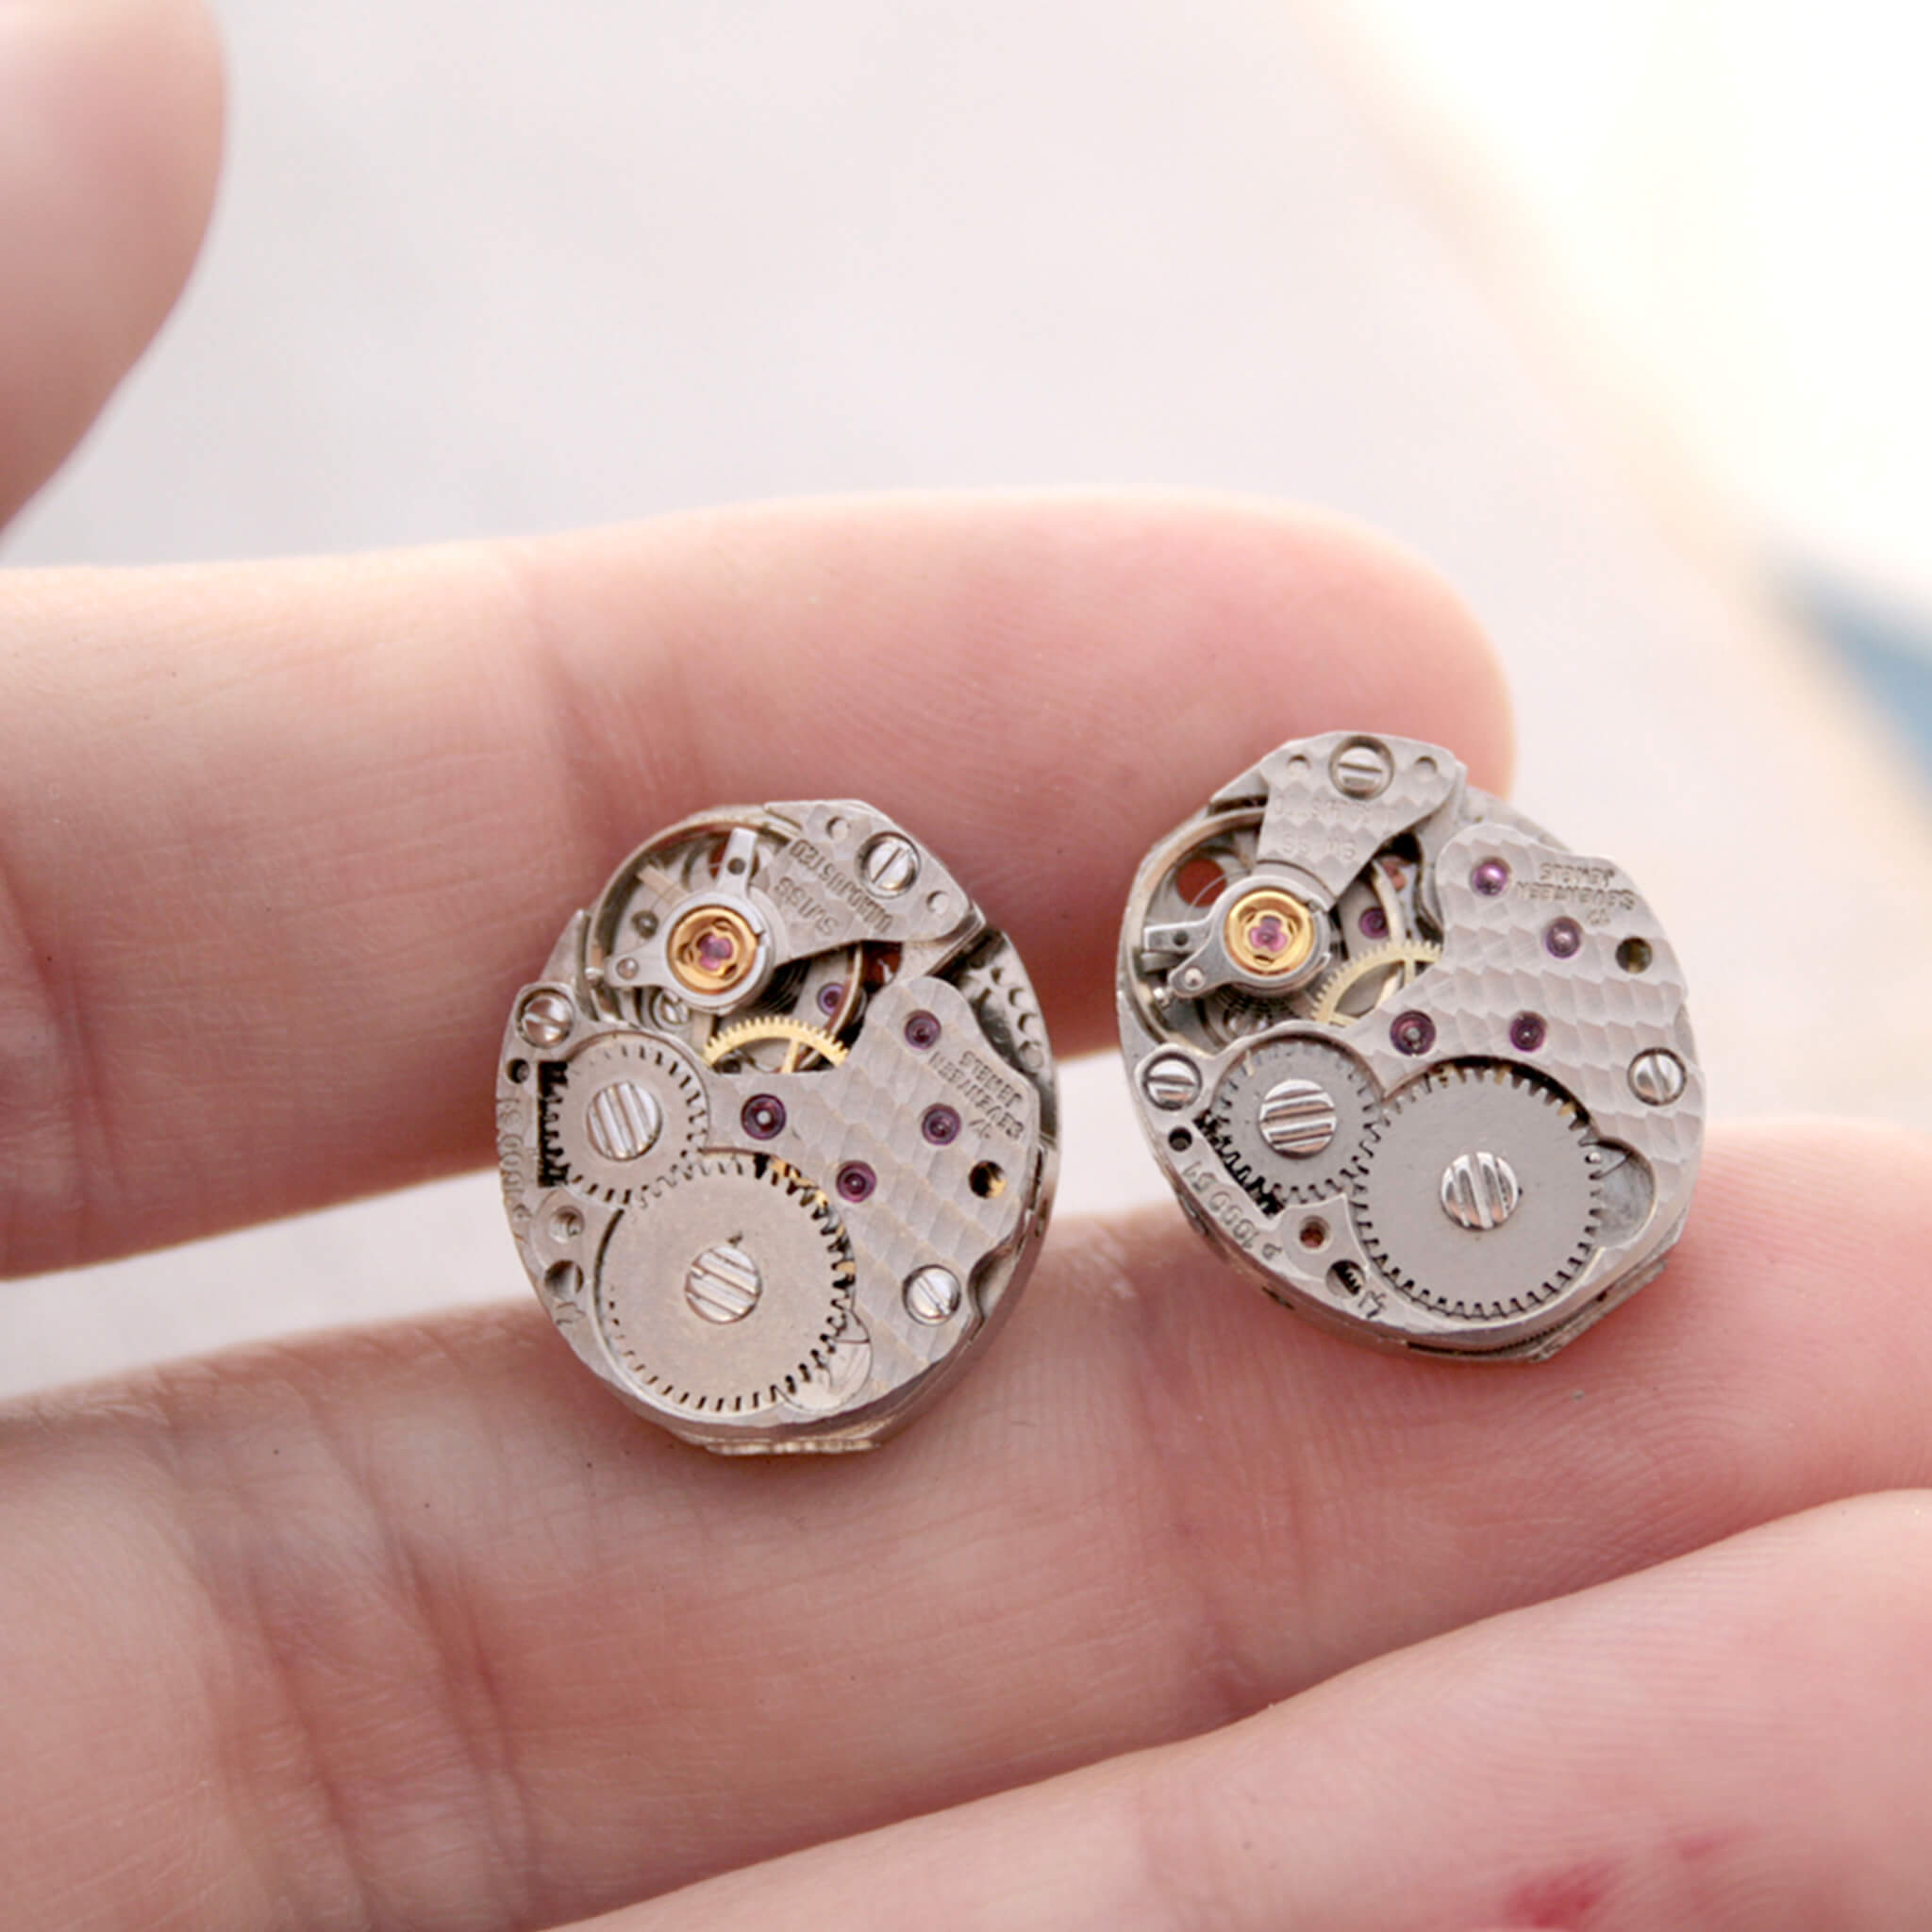 Oval Watch movements turned into stud earrings being hold in hand